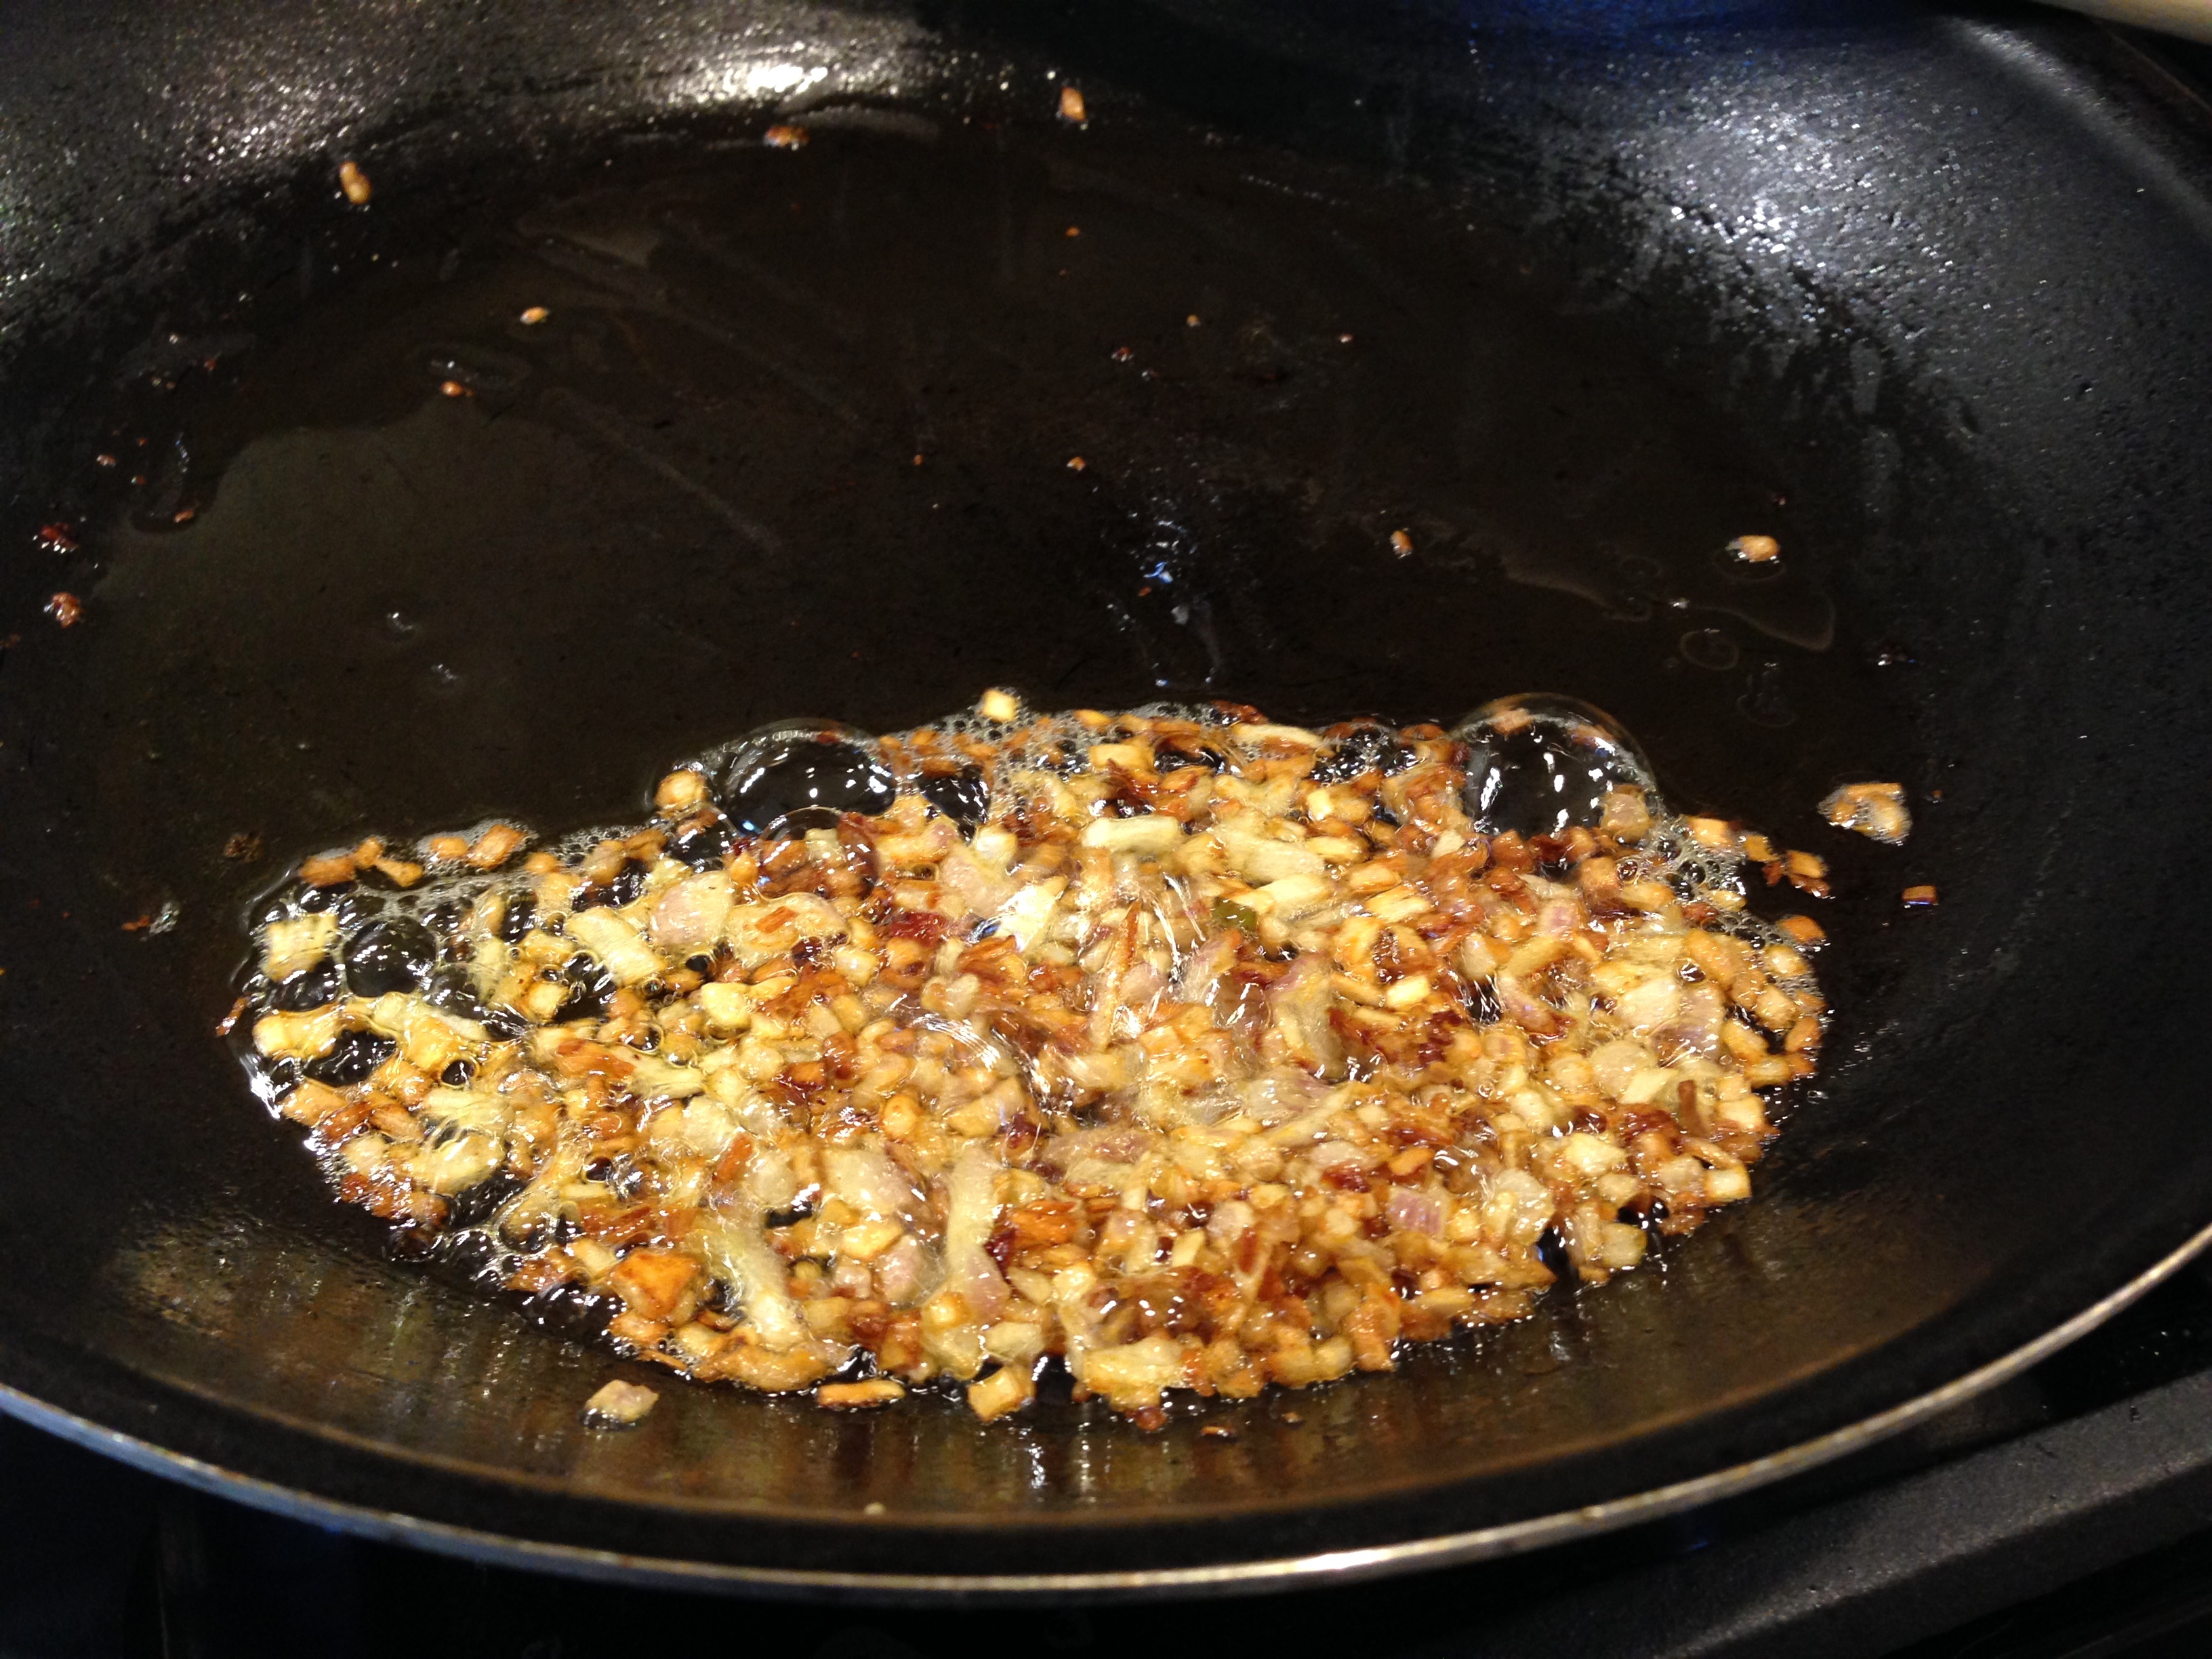 Caramelized shallots in oil